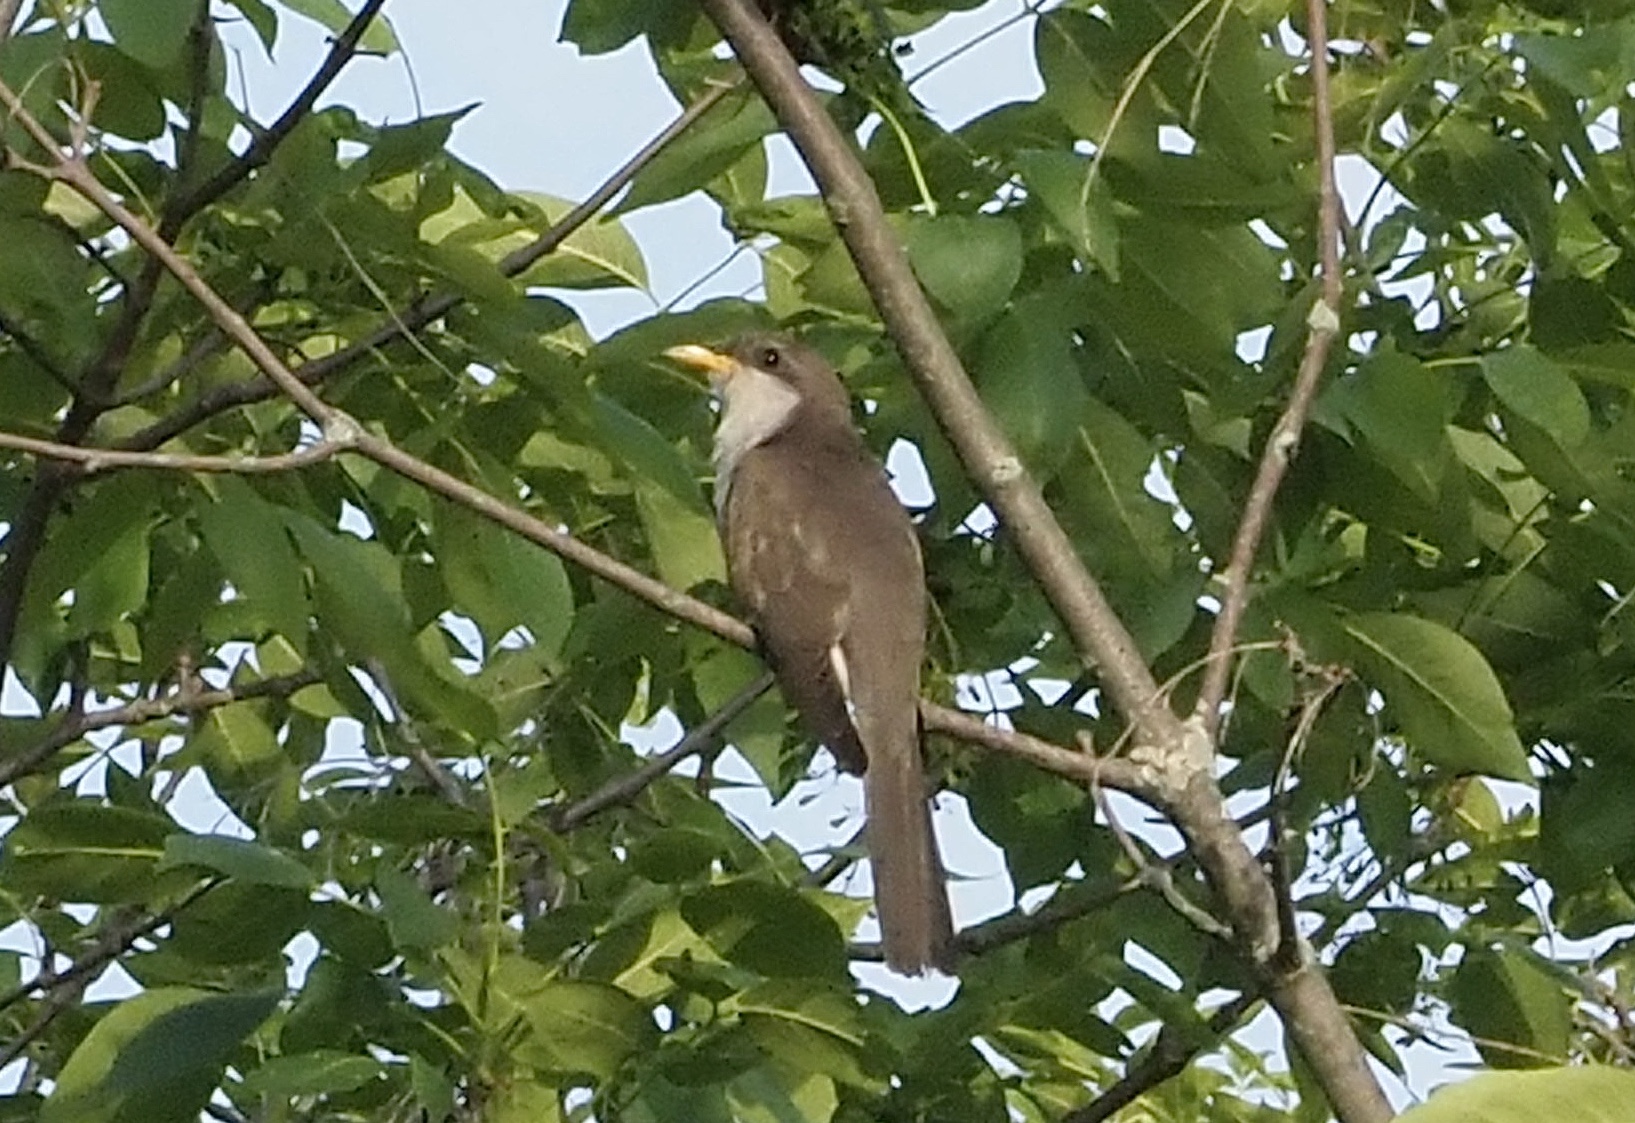 New York State Breeding Bird Survey: Observations of a Yellow-Billed Cuckoo